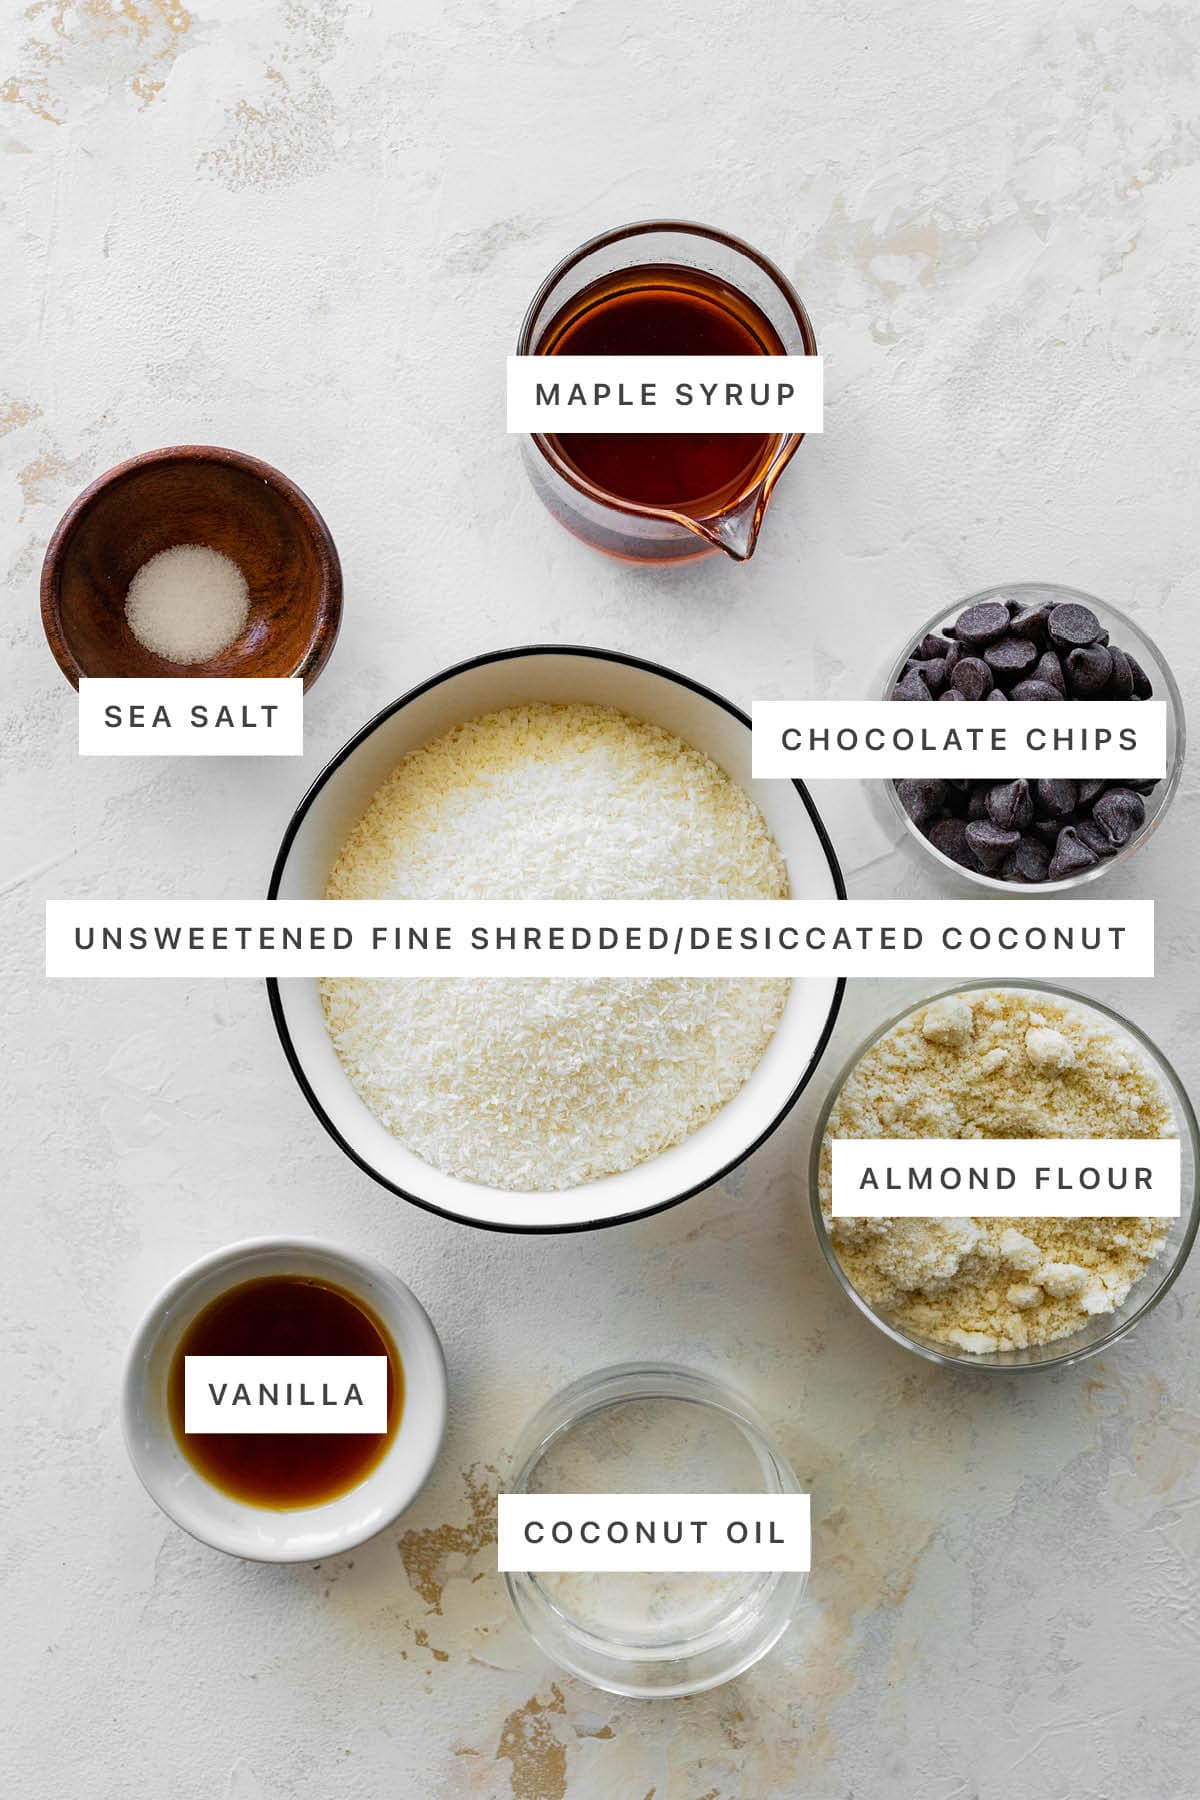 Ingredients measured out to make Coconut Macaroons: sea salt, maple syrup, chocolate chips, unsweetened desiccated coconut, almond flour, vanilla and coconut oil.